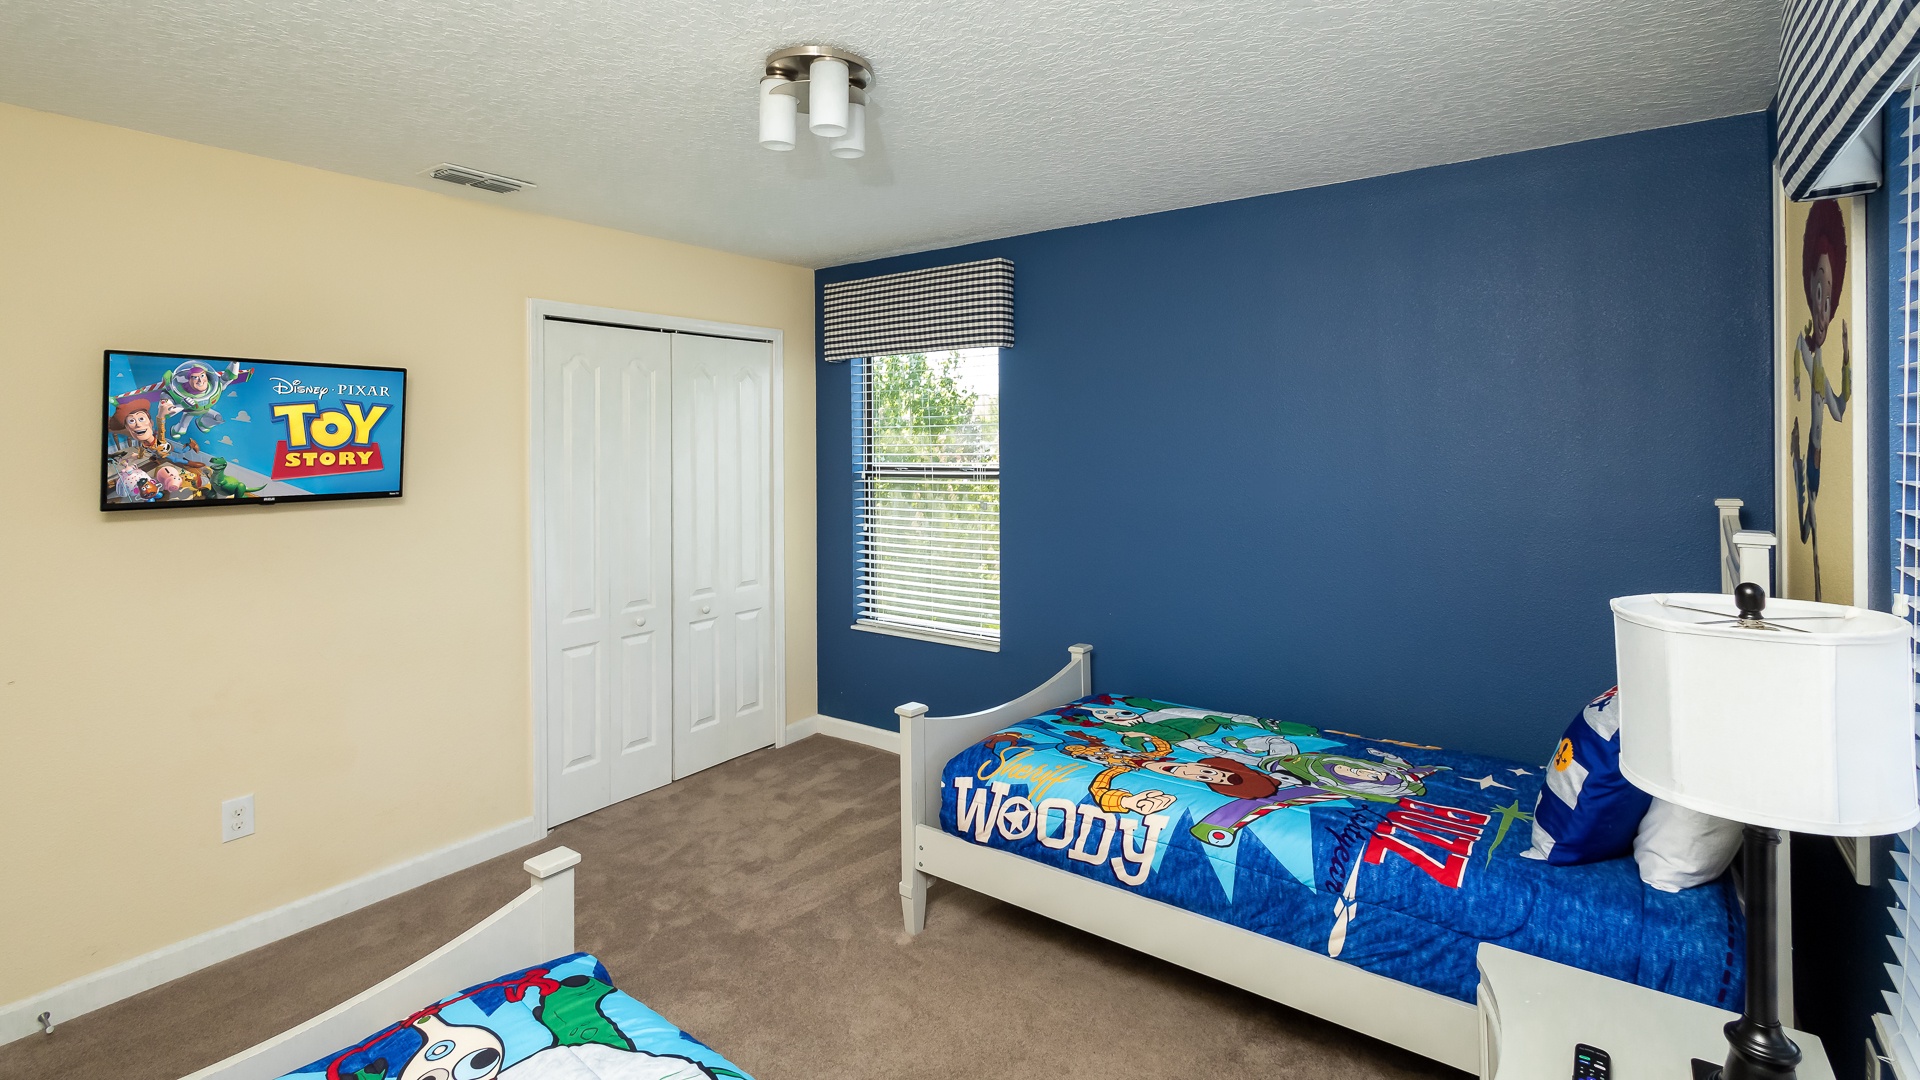 Bedroom 5 Toy Story themed with 2 twin beds, and Smart TV